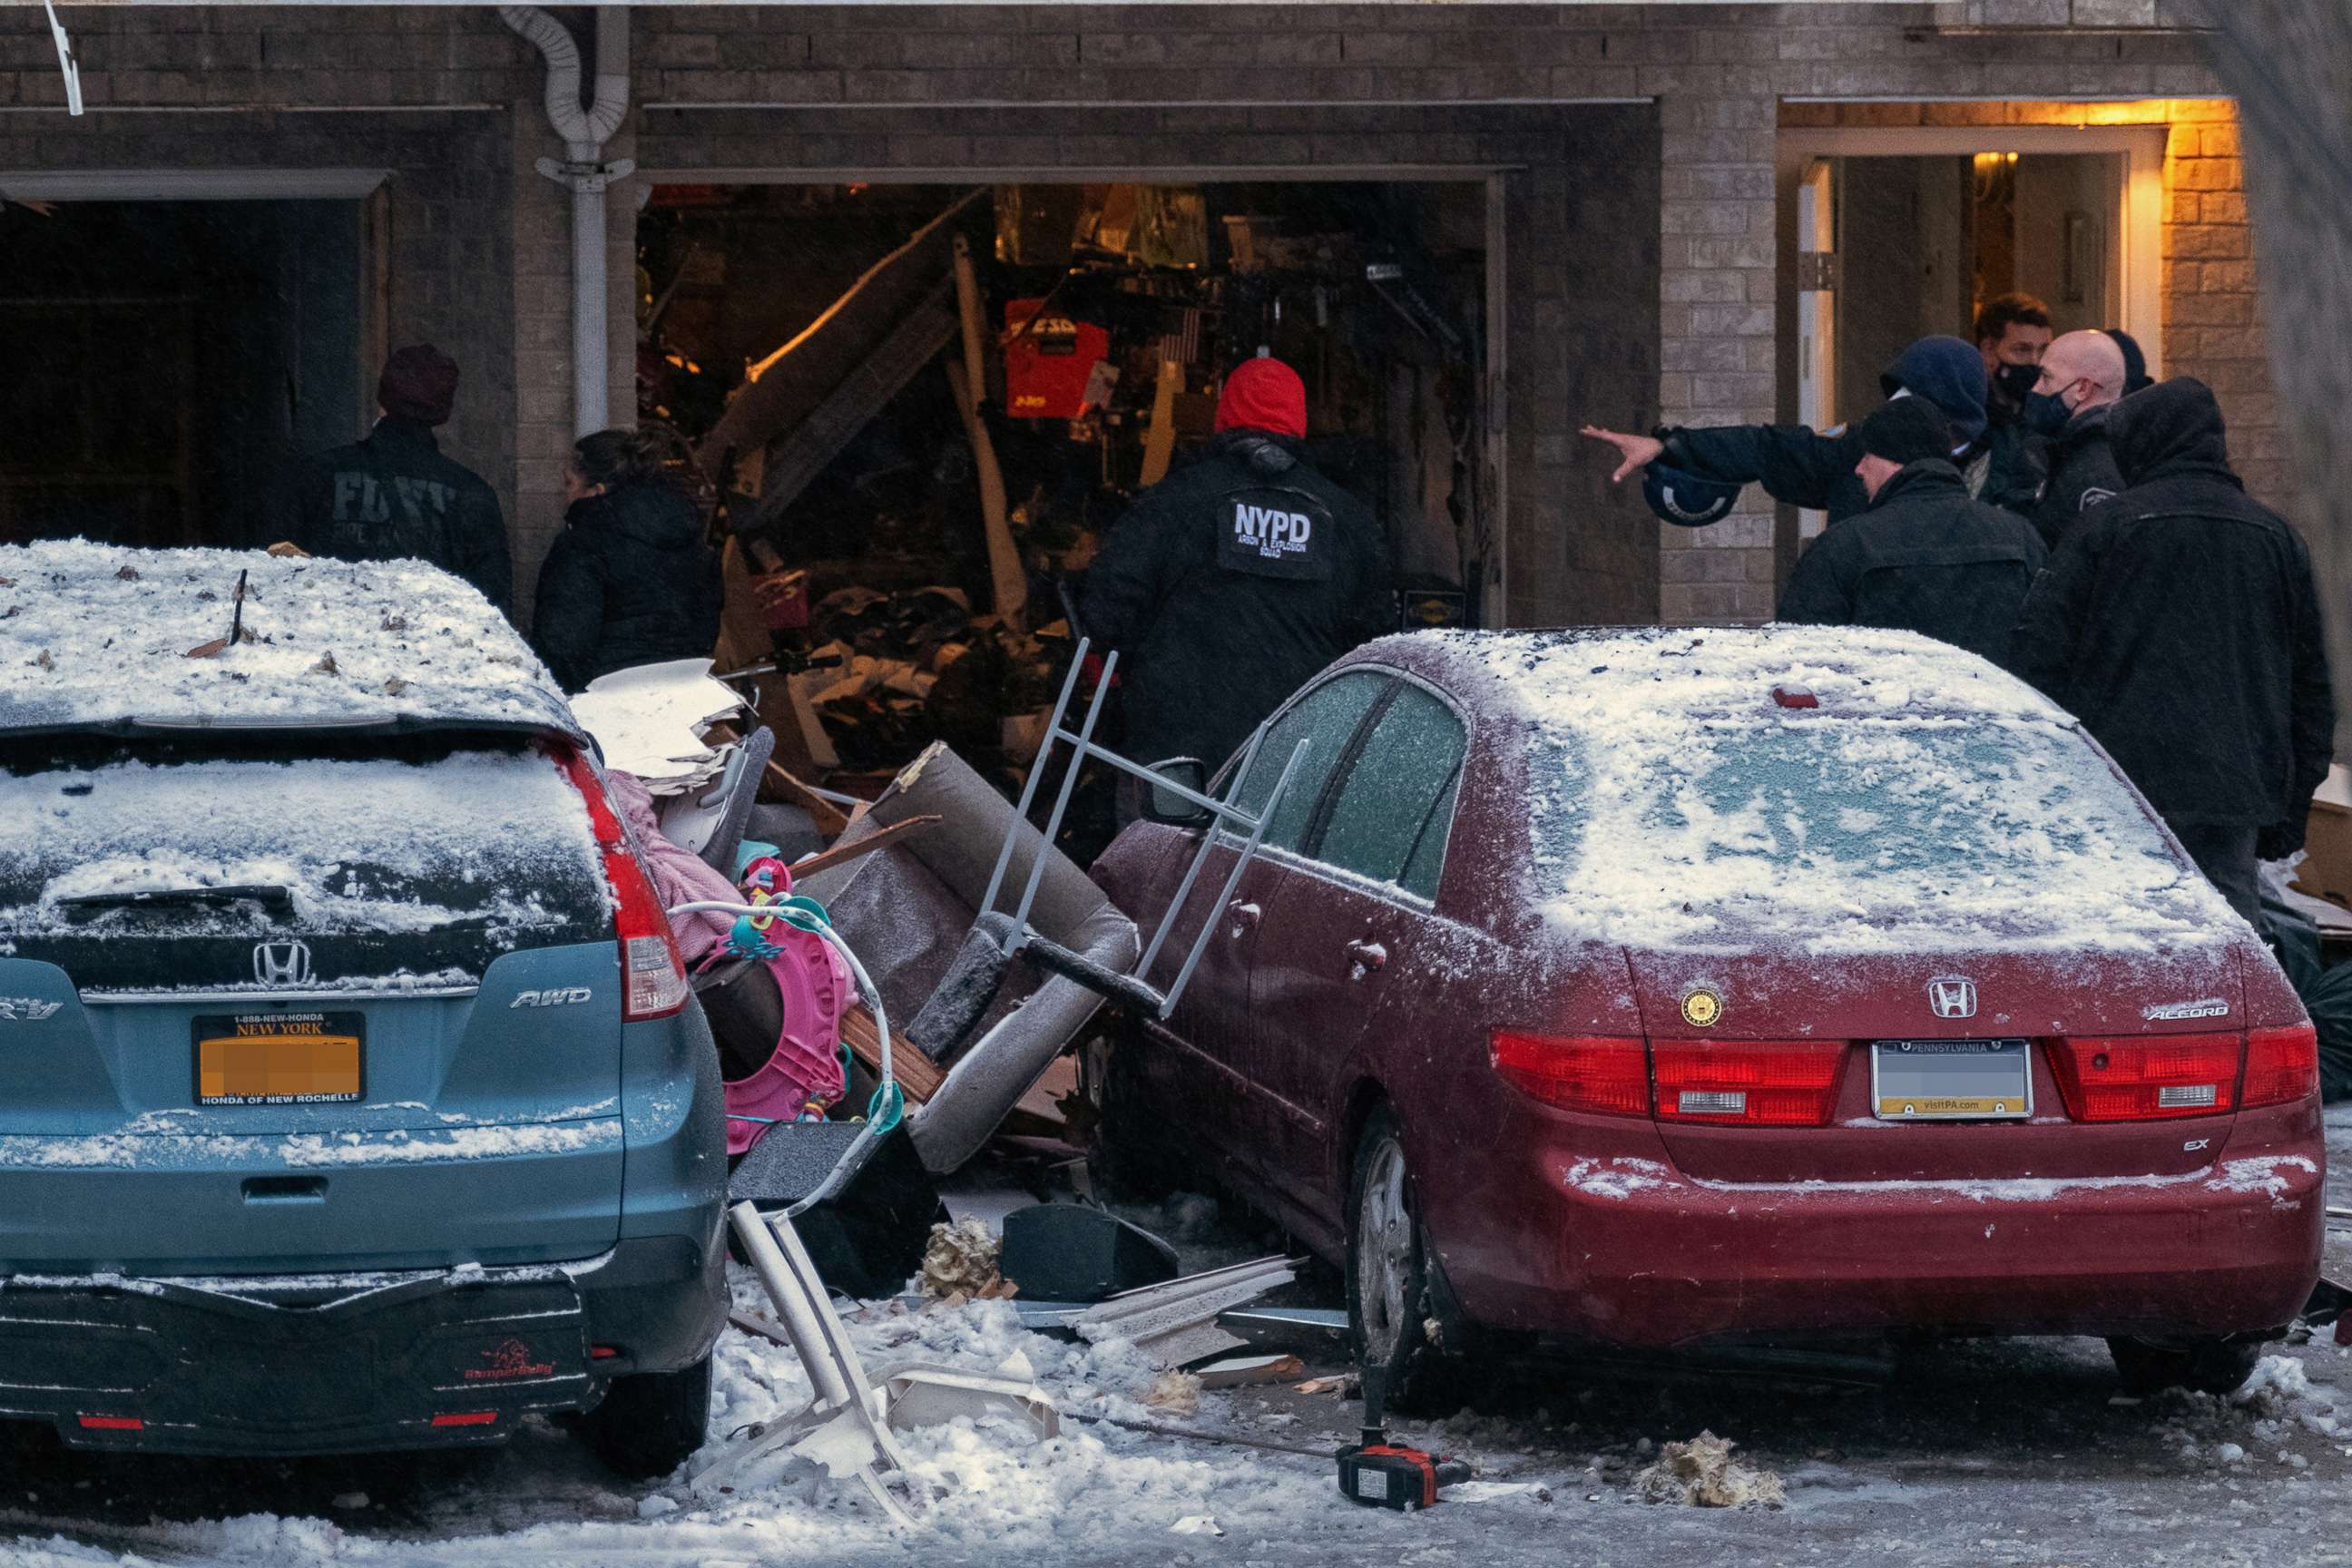 PHOTO: Investigators inspect the scene of an explosion in the Bronx on Feb. 18, 2021, in New York.